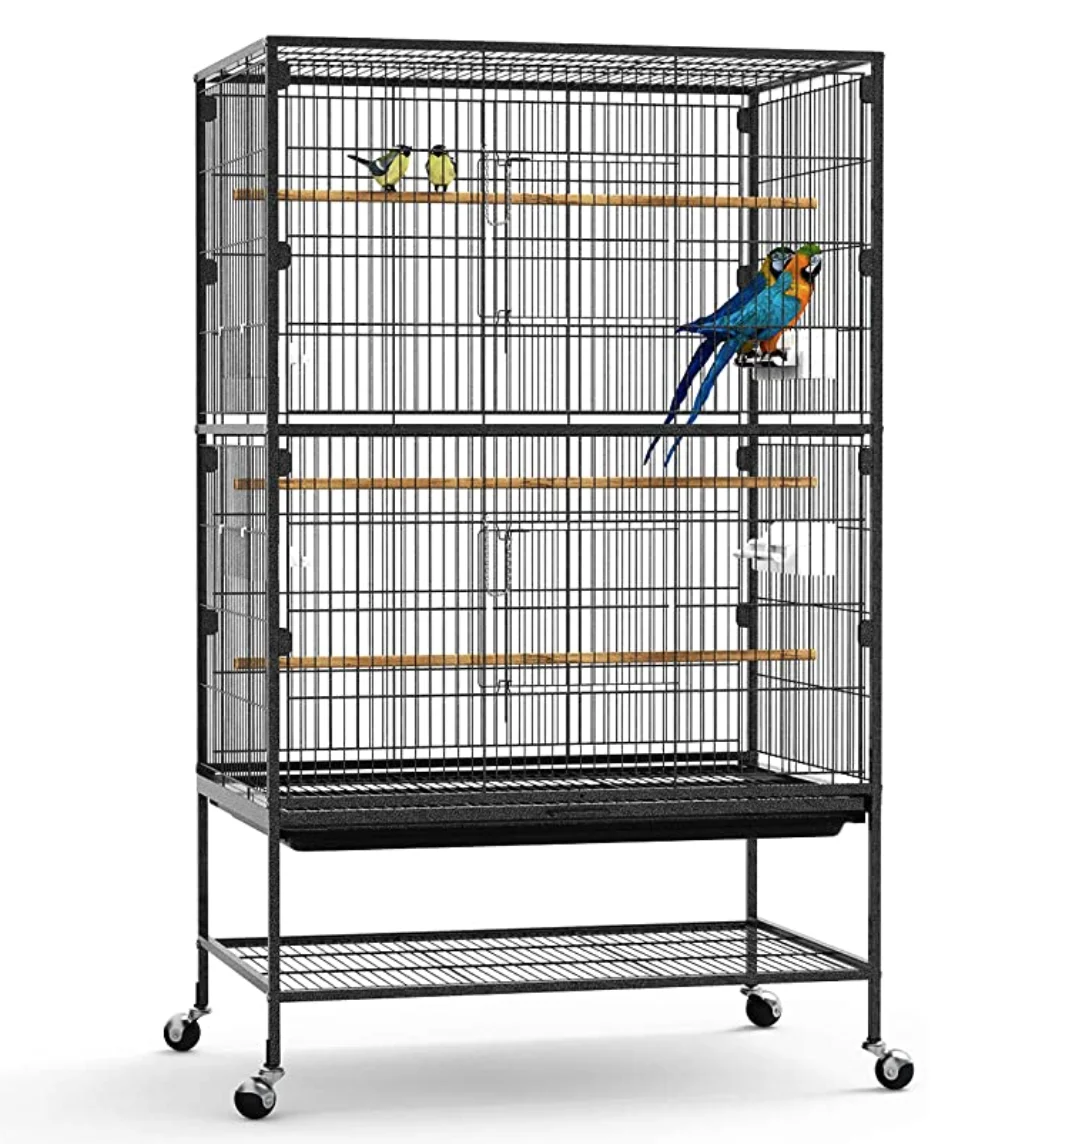 

Wholesales Metal Durable Cage Outdoor China Canary Bird Cage Parrot With Wheels, Black